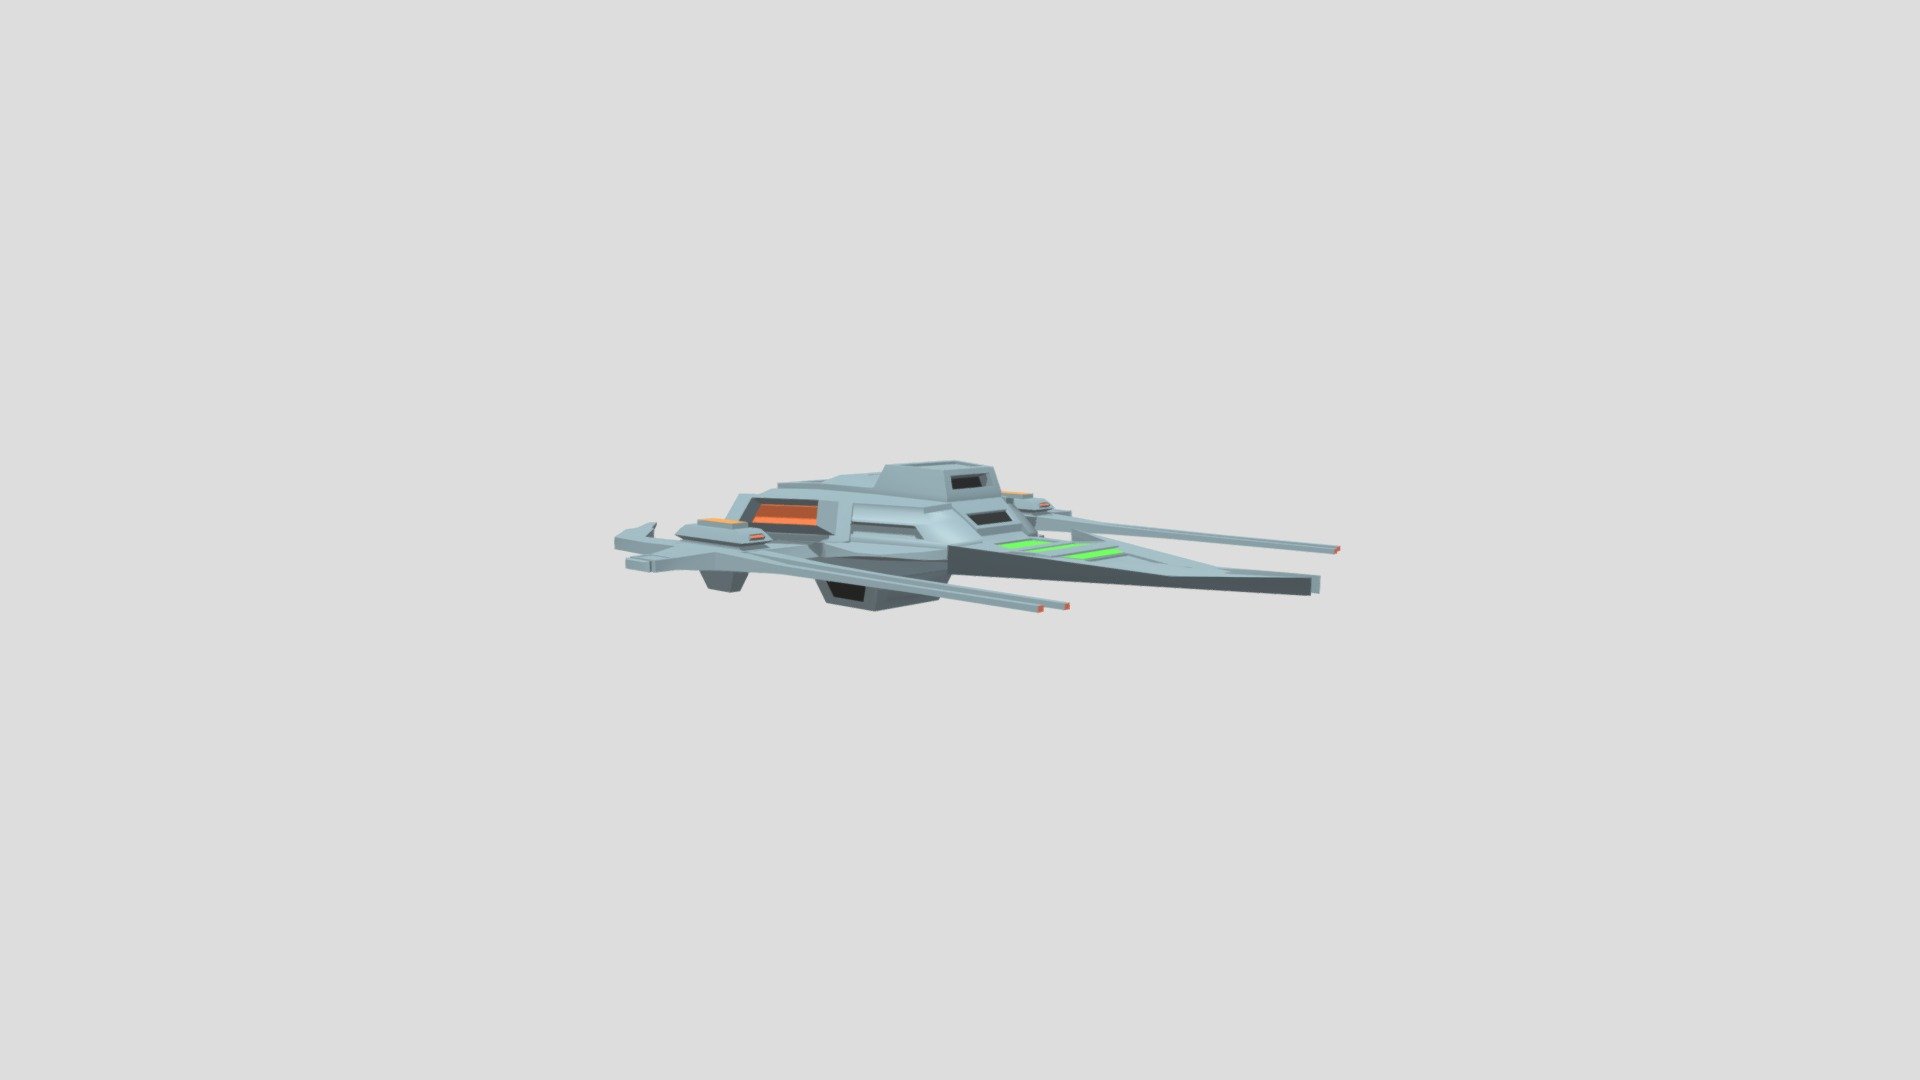 Low poly spaceship